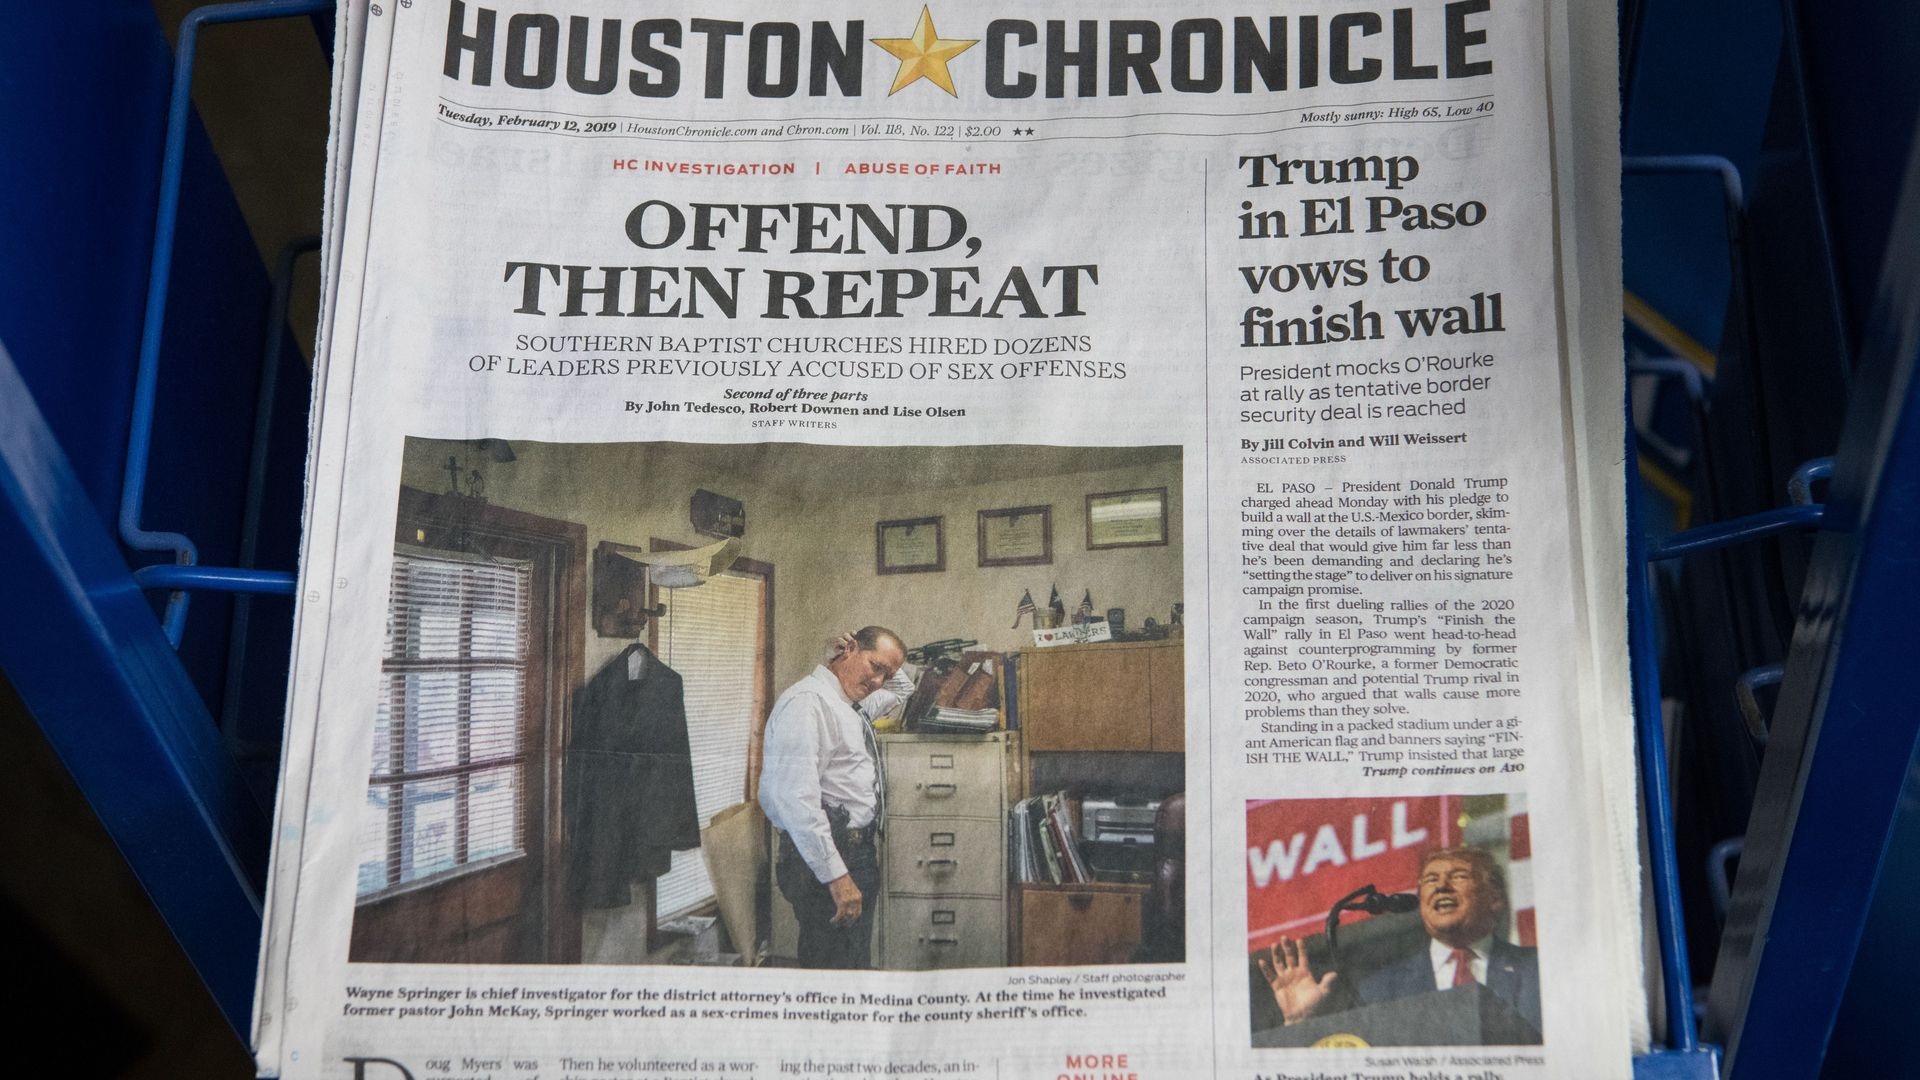 This Feb. 12, 2019 photo shows a Houston Chronicle story on alleged abuse in Southern Baptist churches.